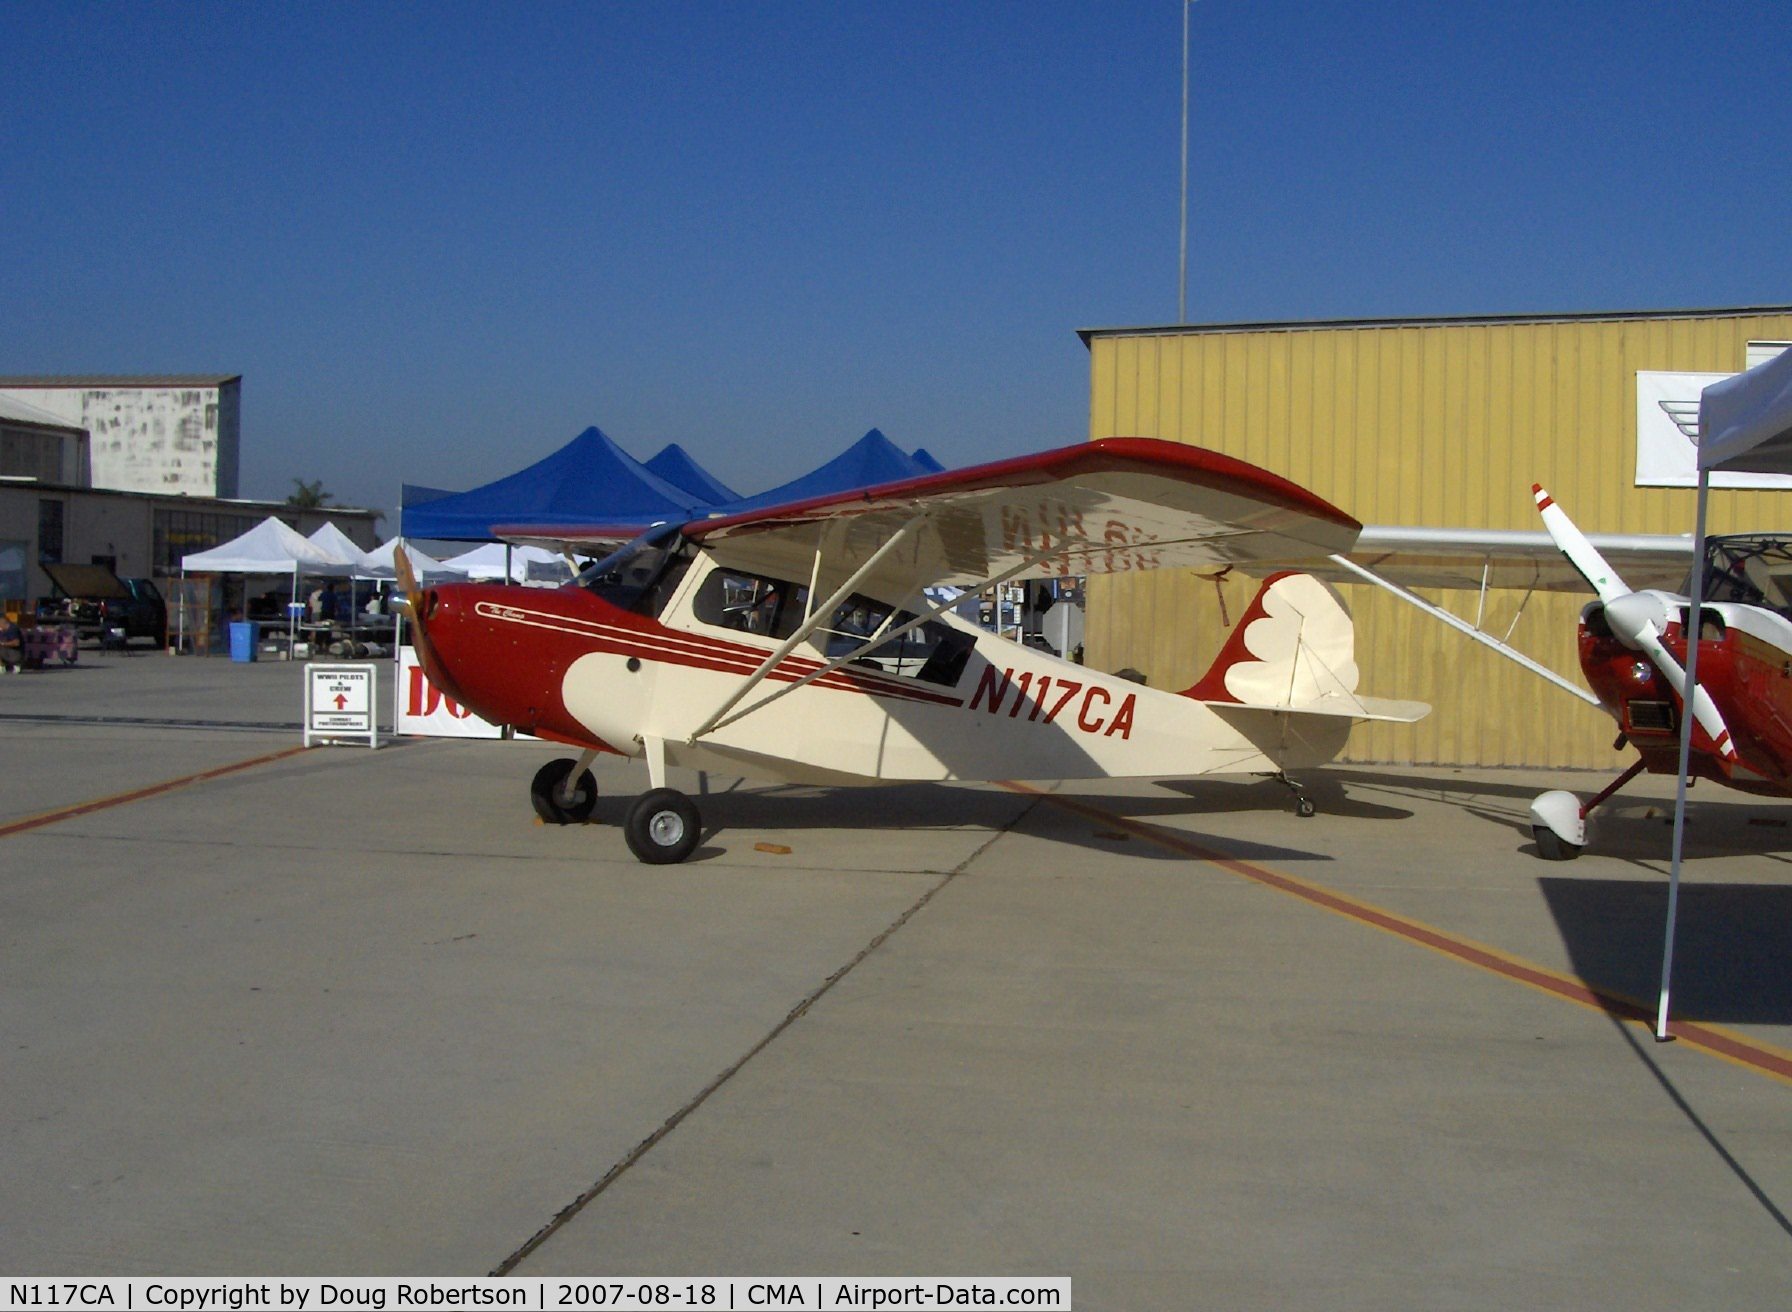 N117CA, American Champion 7EC C/N 1008-2007, 2007 American Champion 7EC CHAMP, Continental O-200 100 Hp, wood prop, reduced fuel capacity to meet LSA weight requirements